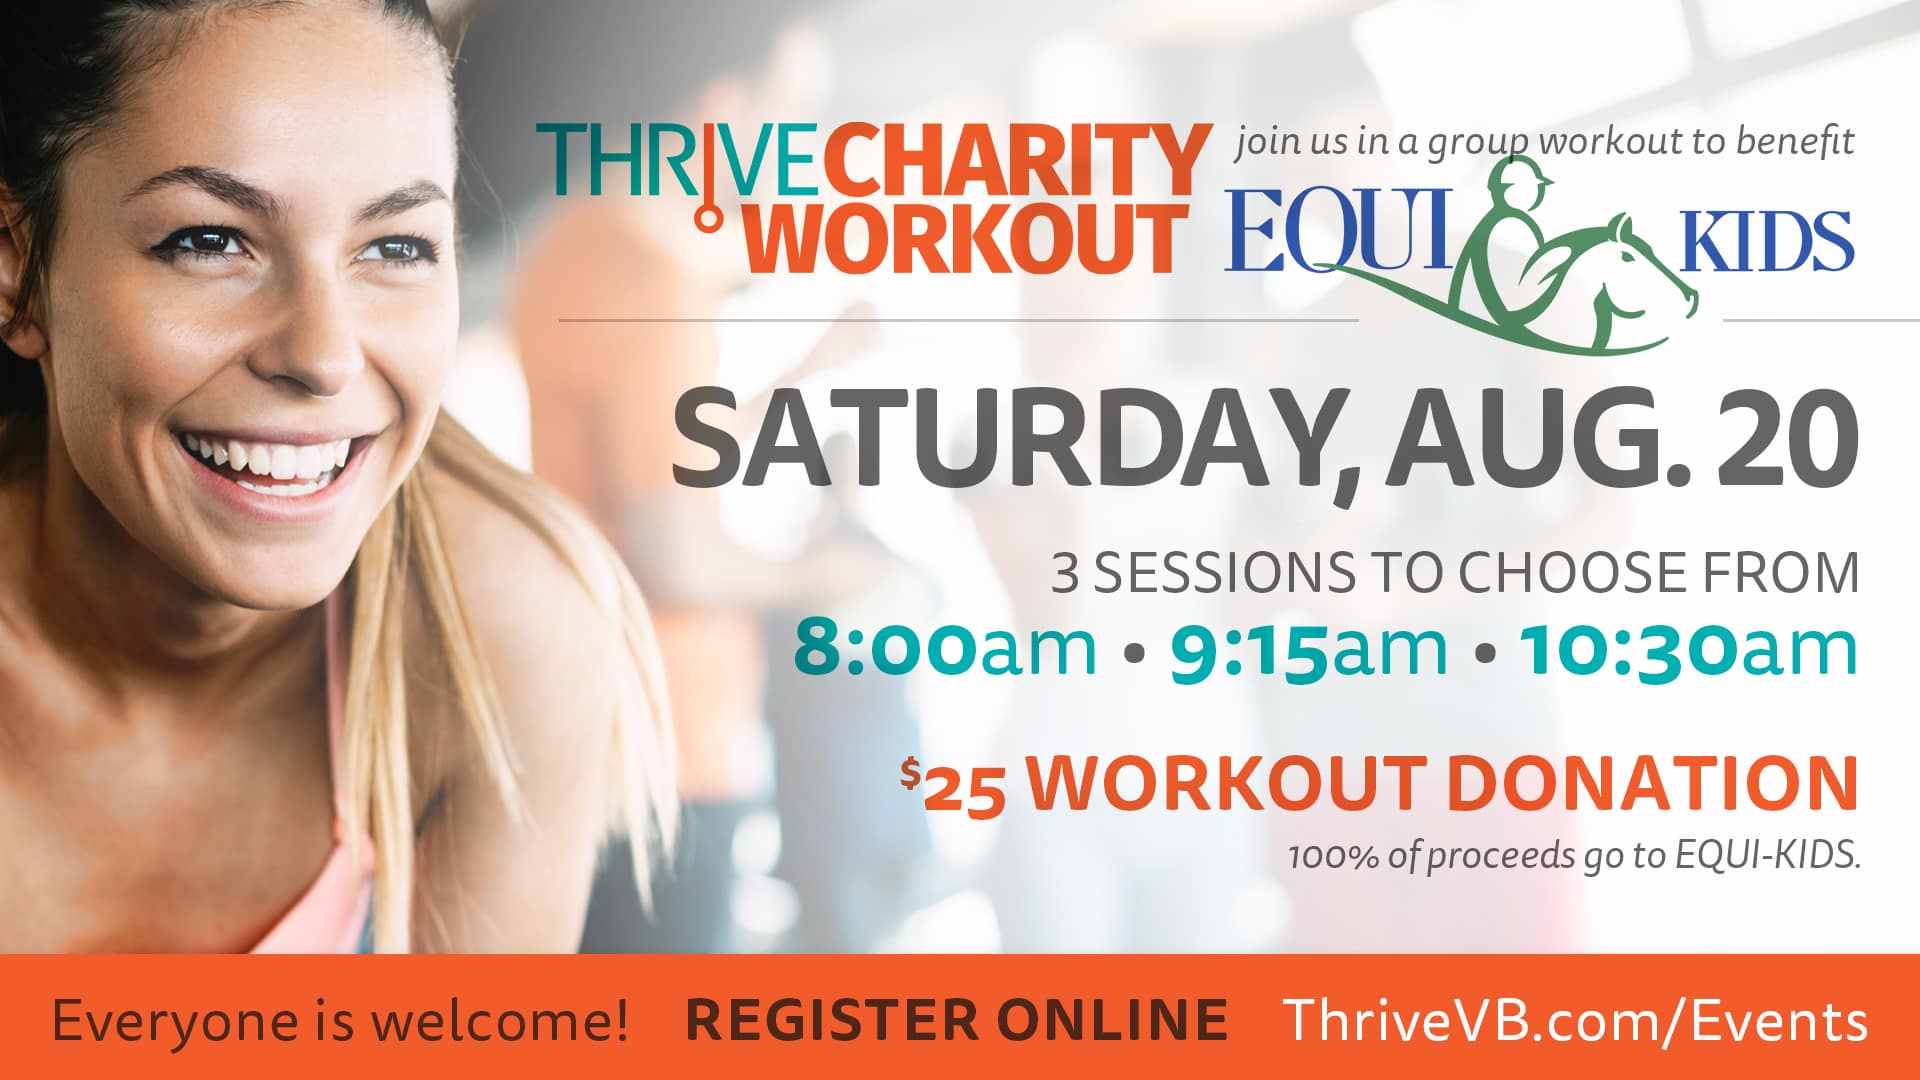 Thrive Charity Workout to benefit EQUI-KIDS